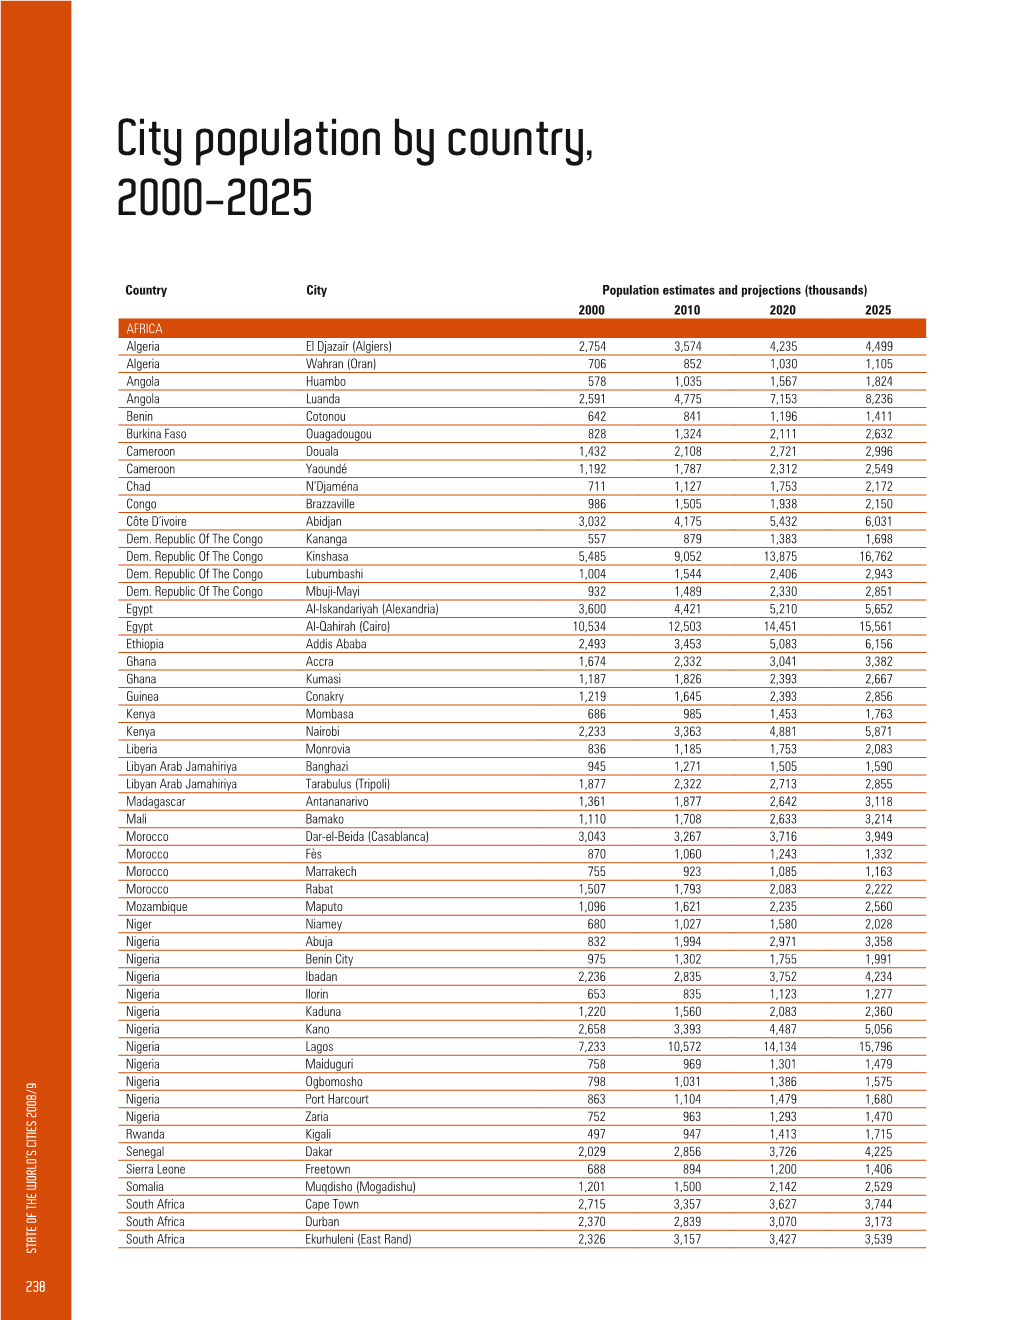 City Population by Country, 2000-2025